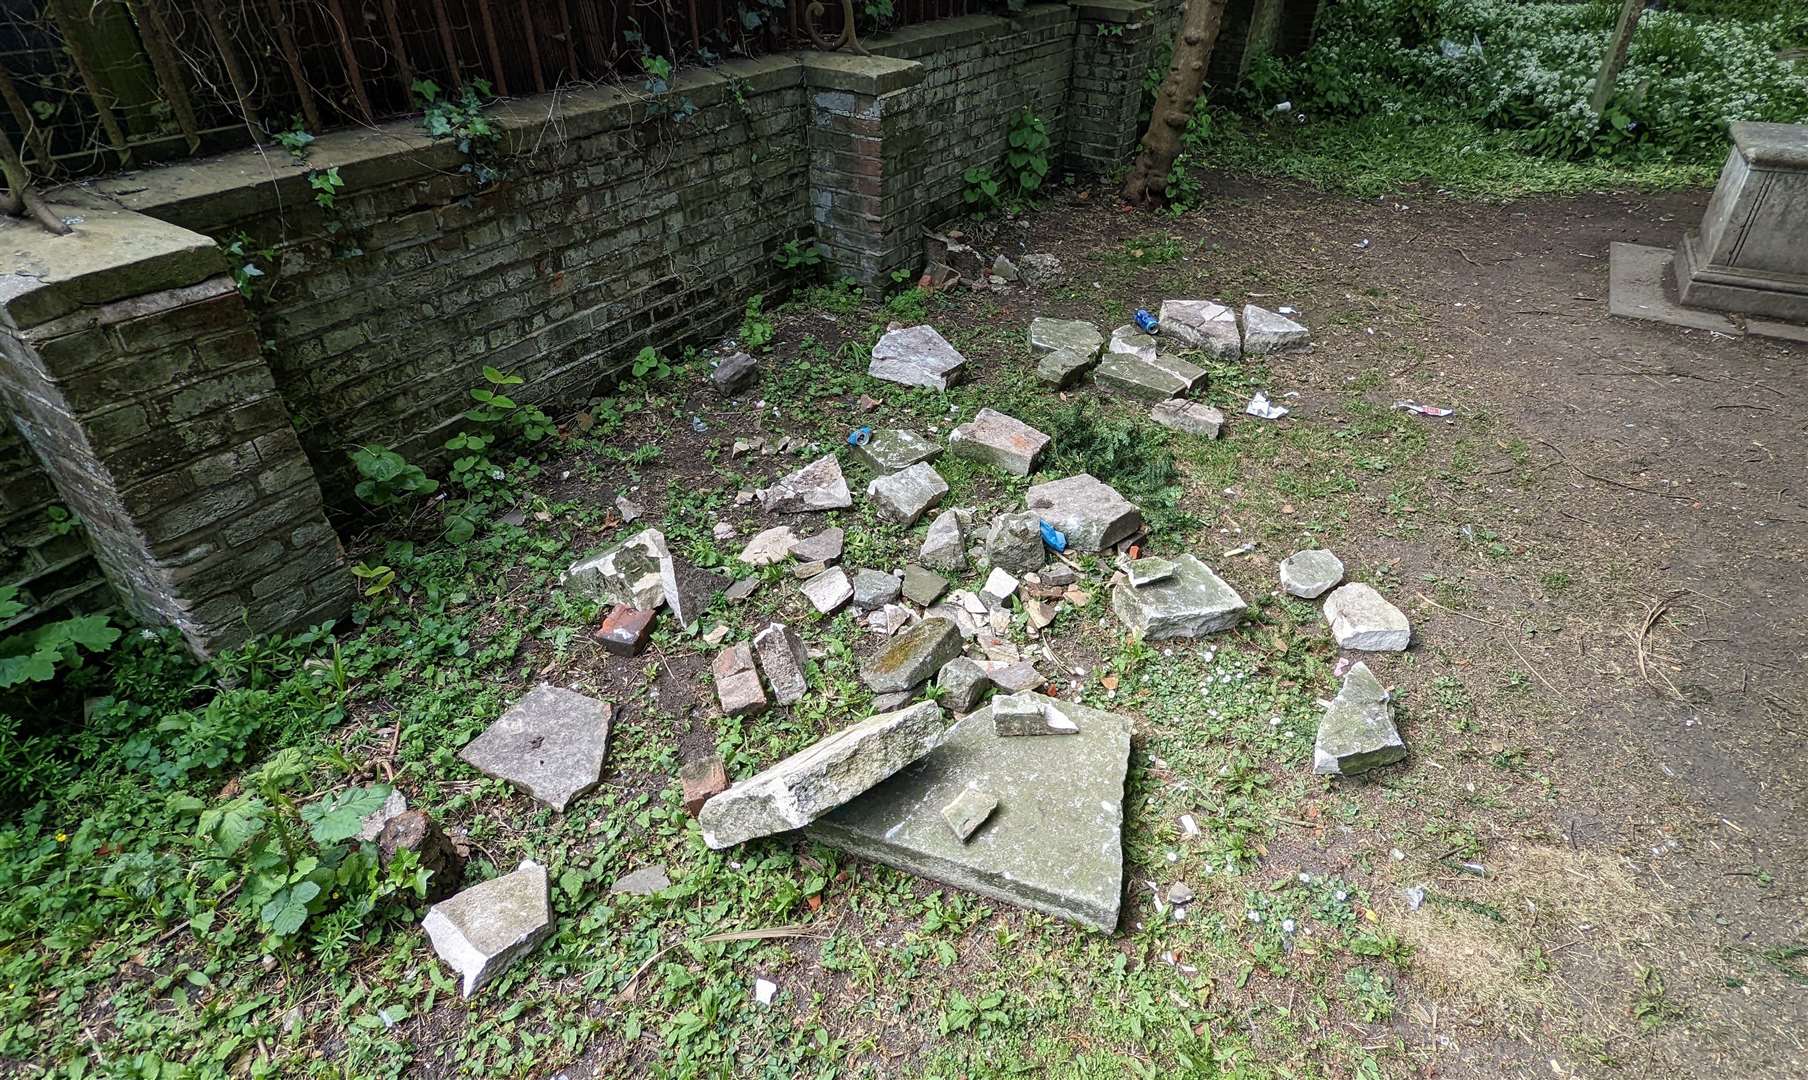 Damage to graves in the churchyard of the Parish Church of St Mary & St Eanswythe in Folkestone